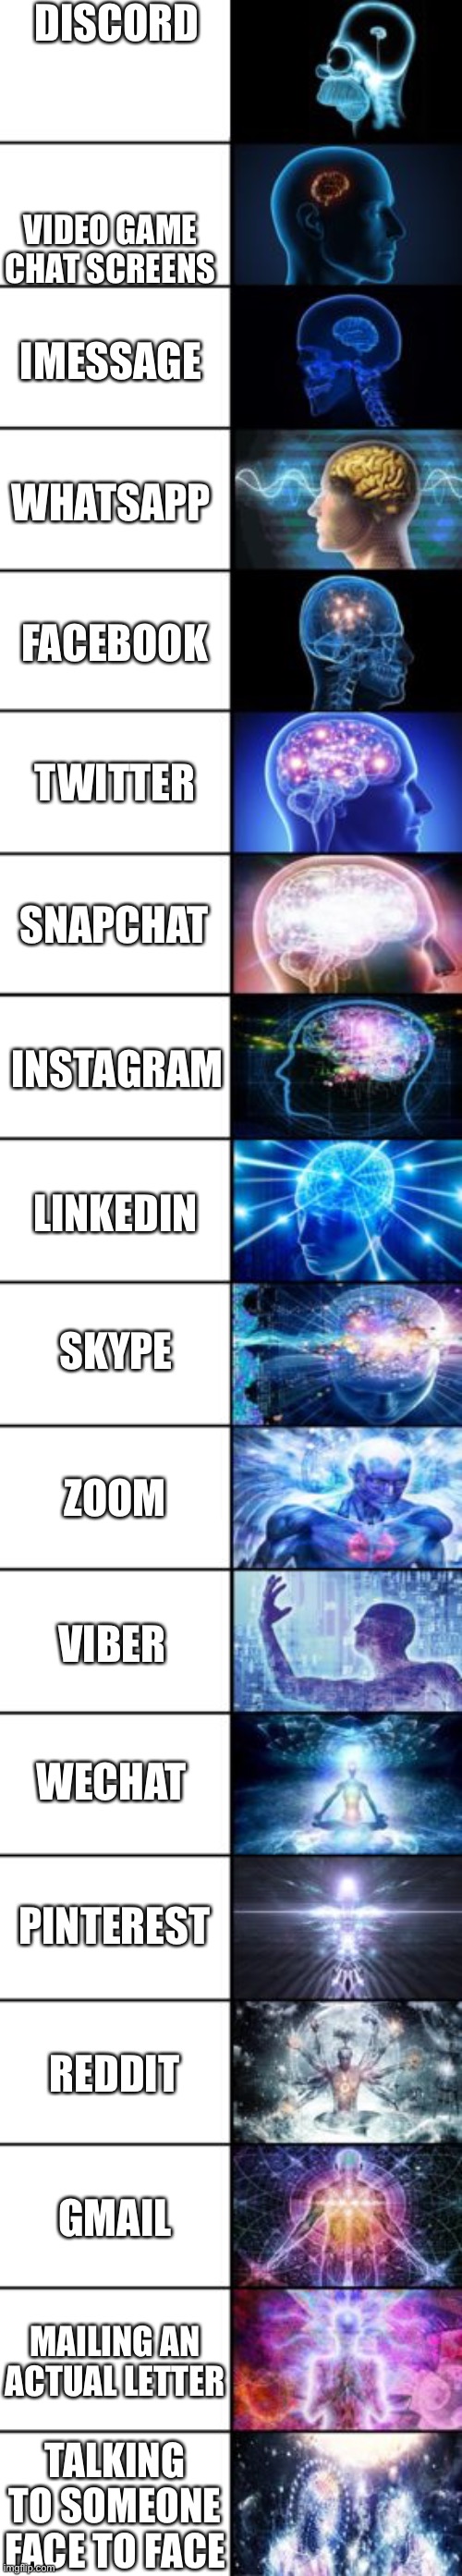 How do you chat? | DISCORD; VIDEO GAME CHAT SCREENS; IMESSAGE; WHATSAPP; FACEBOOK; TWITTER; SNAPCHAT; INSTAGRAM; LINKEDIN; SKYPE; ZOOM; VIBER; WECHAT; PINTEREST; REDDIT; GMAIL; MAILING AN ACTUAL LETTER; TALKING TO SOMEONE FACE TO FACE | image tagged in expanding brain longest version | made w/ Imgflip meme maker